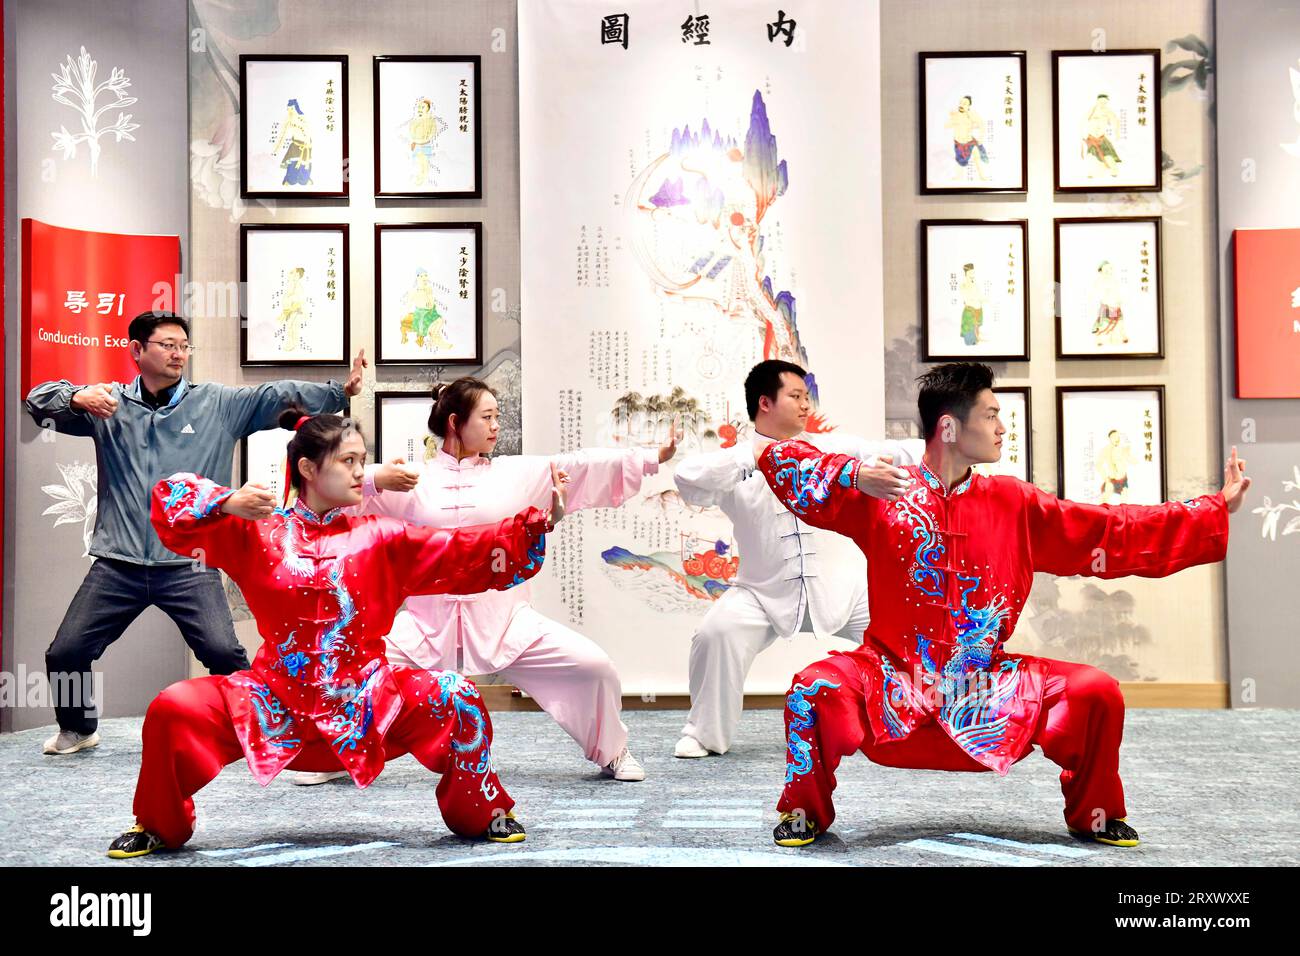 (230927) -- QUFU, Sept. 27, 2023 (Xinhua) -- Staff members from the Affiliated Hospital of Shandong University of Traditional Chinese Medicine perform Baduanjin, a martial art for fitness purposes, during the Ninth Nishan Forum on World Civilizations in Qufu, east China's Shandong Province, Sept. 27, 2023.  The forum on Confucius culture kicked off Wednesday in the city of Qufu, the birthplace of the prominent Chinese philosopher.   The Nishan Forum on World Civilizations, the ninth since its inception in 2010, has attracted 330 foreign guests, including politicians, representatives from inter Stock Photo